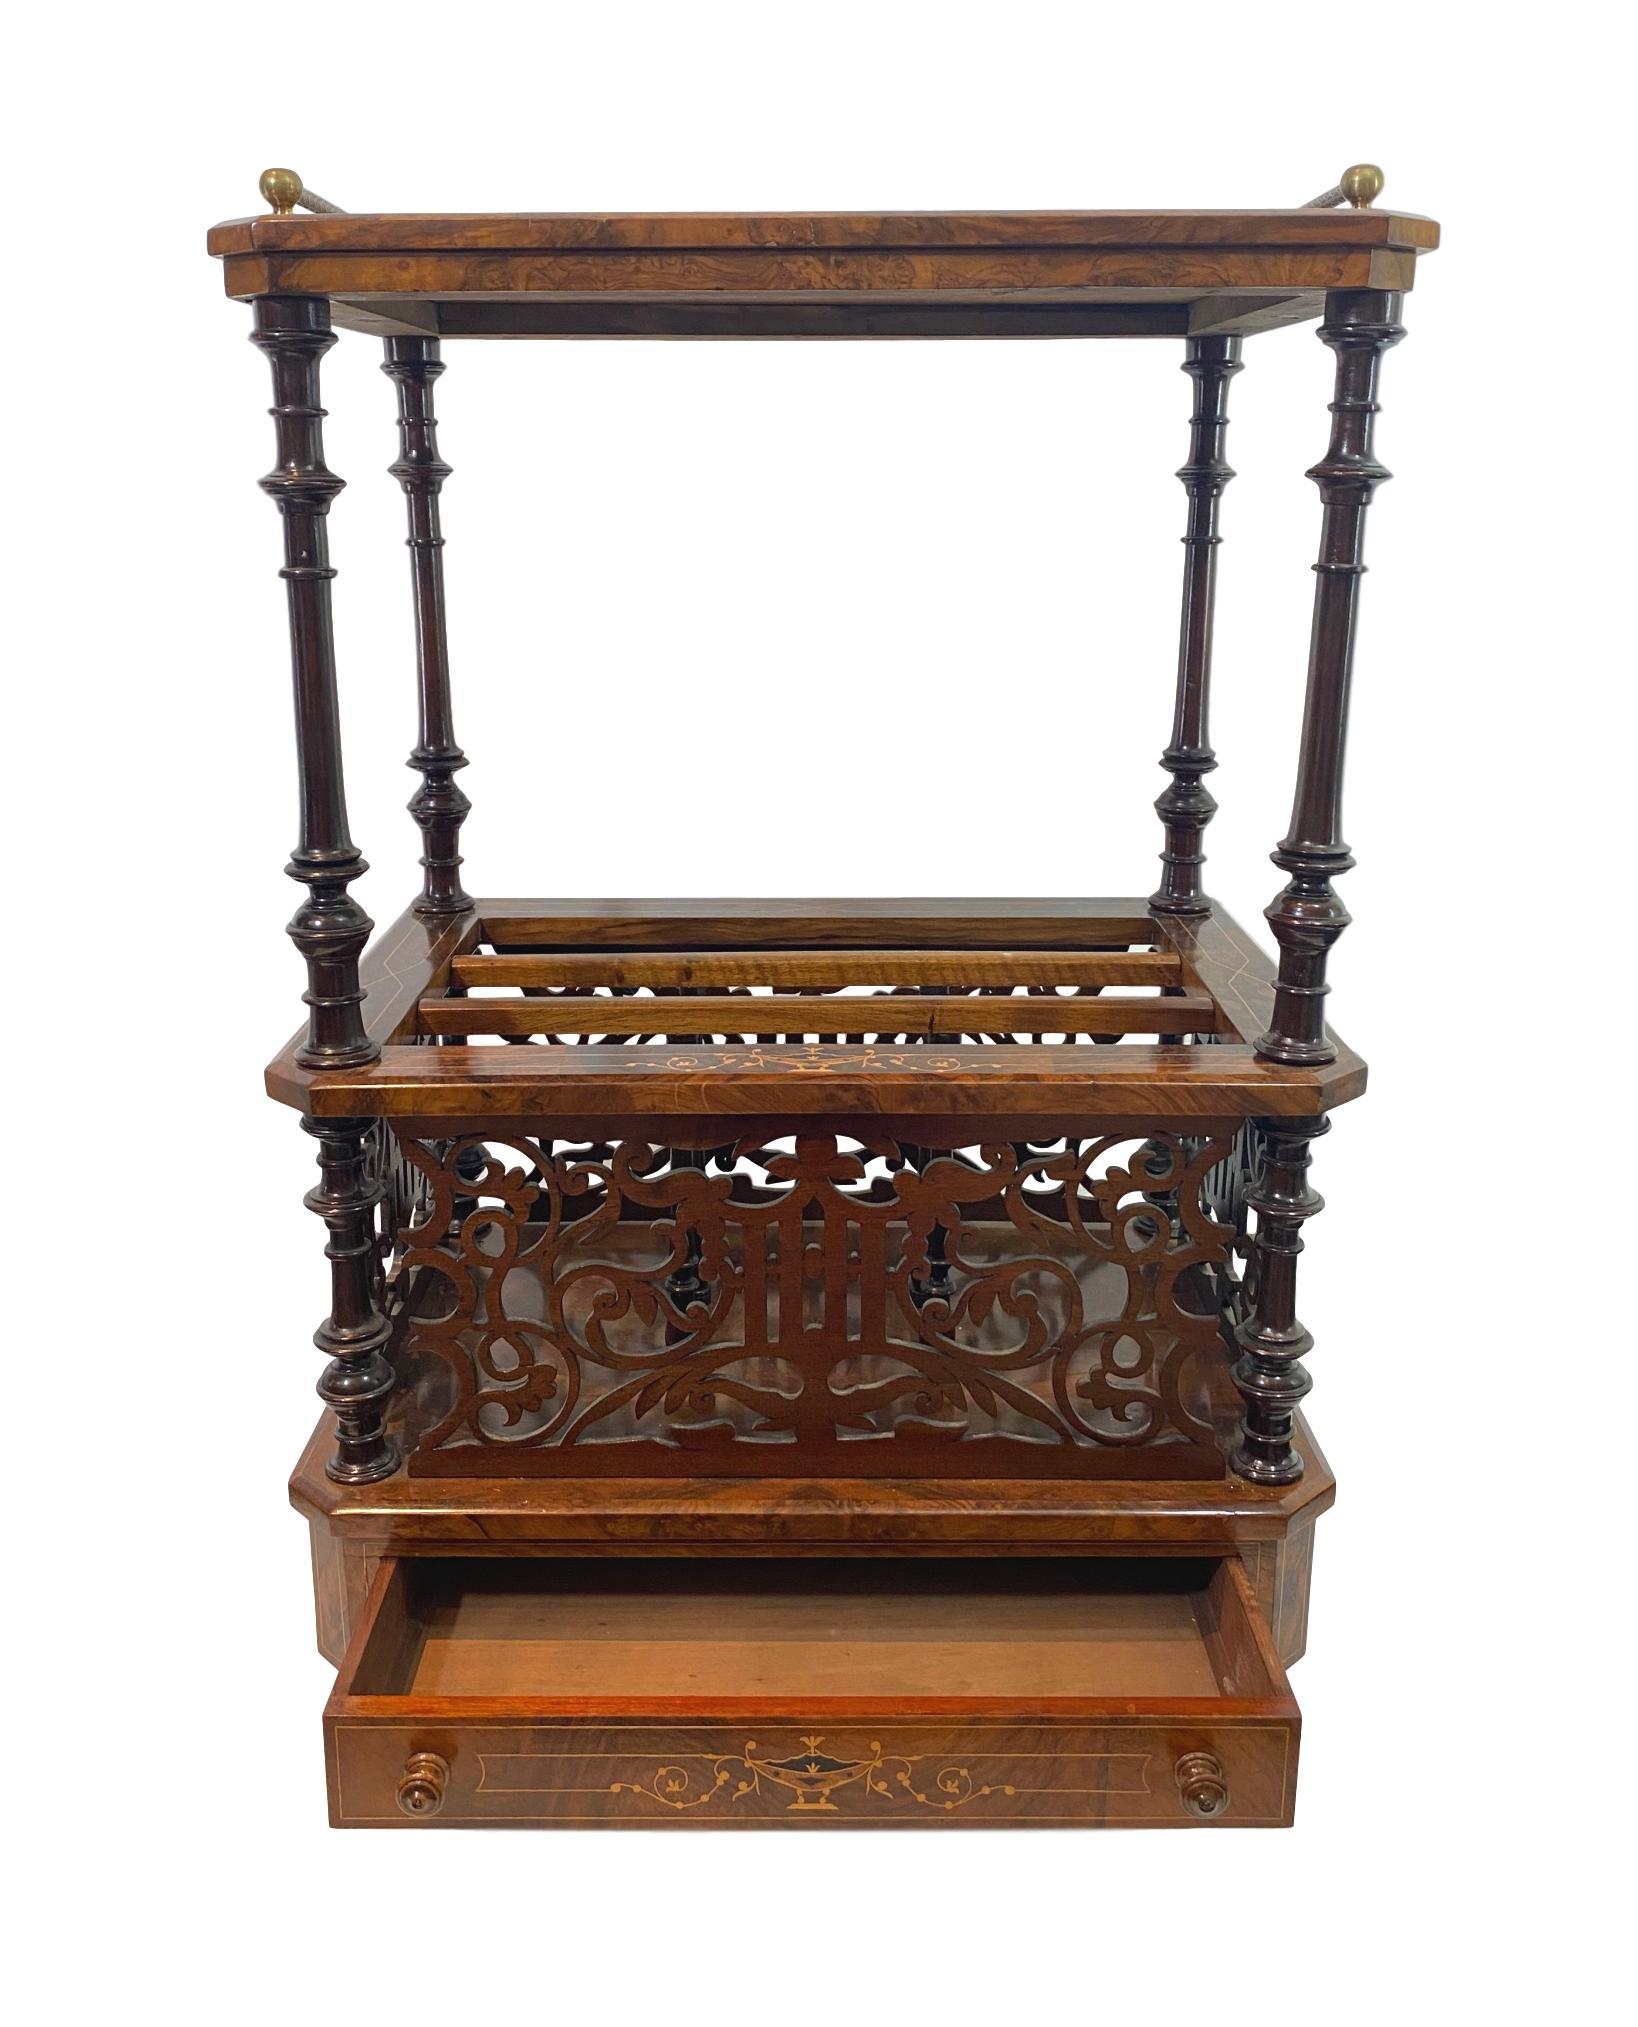 Burl walnut and Marquetry inlaid Canterbury or sheet music stand, English, circa 1880, the highly figured walnut top finely inlaid with ebony and exotic woods forming a central loving cup with stylized floral vines issuing forth, with satinwood